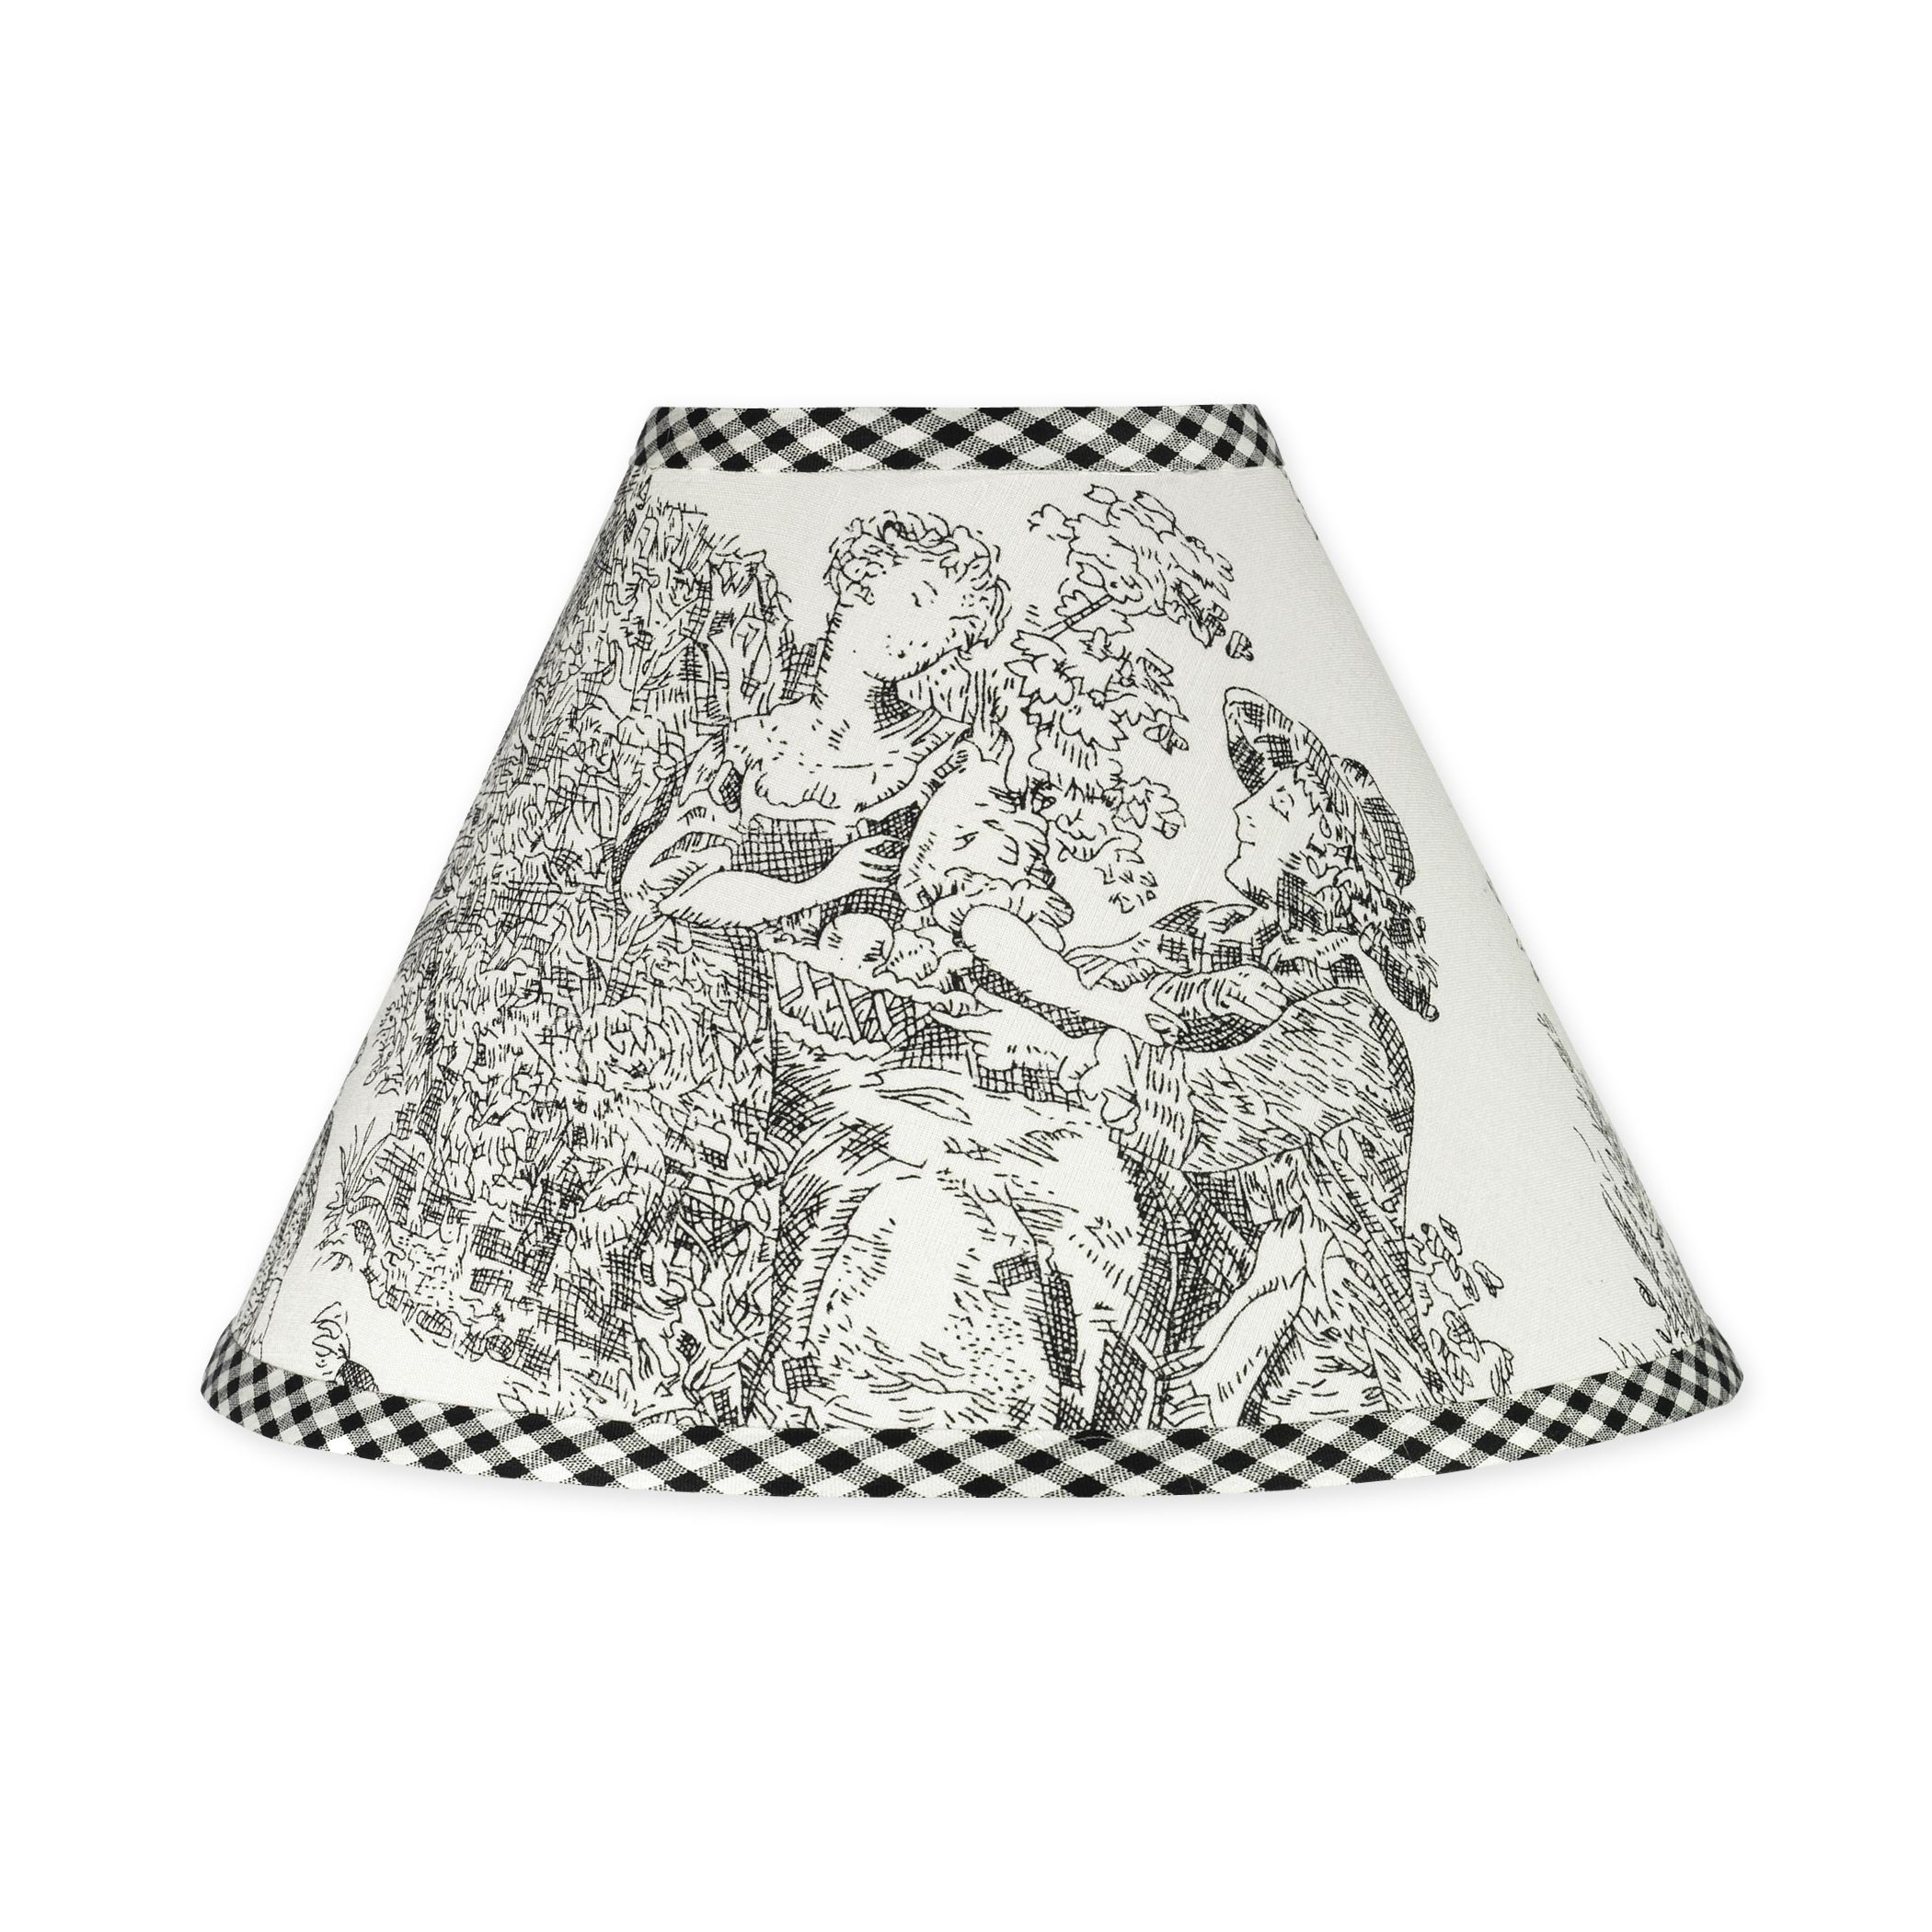 10" French Toile Empire Lamp Shade